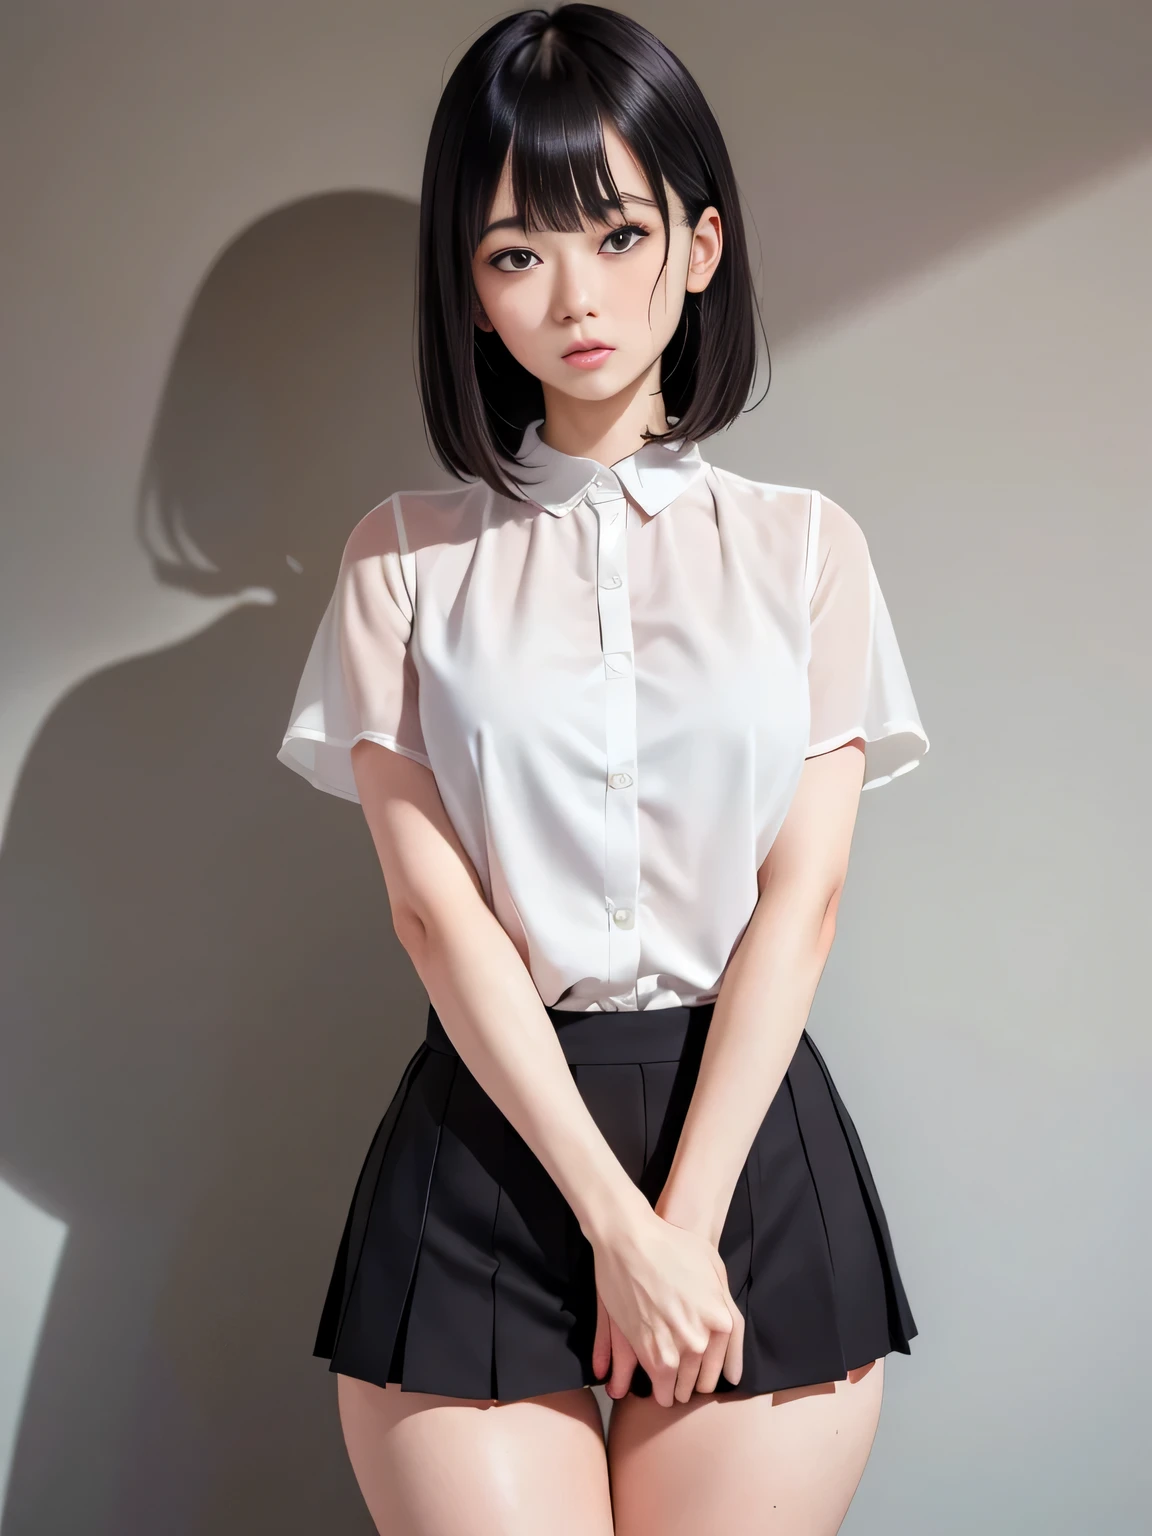 masterpiece,highest quality,very detailed,A beautiful Japanese woman, small face,thin face,(black hair,straight bob:1.1, bangs bangs),black eyes,((very muscular thighs)),(((very thick thighs))),(((Thighs with prominent blood vessels and veins))),Thighs with visible muscle lines,((Thighs with noticeable muscle undulations)),shiny thighs,((Thigh gap)),((Lean upper body)),((upper body without muscles)),(((thin waist))),((thin ribs)),((narrow ribs)),((big ass)),((oily skin)),(anatomically correct), All limbs, full finger,I was scared,panic,constricted pupils,screaming,raised eyebrows,I opened my eyes,Are crying,tears,(((blush))),(((painful expression))),(((open your mouth wide))),(((cry))),(((shout))),(((anger))),(((be scared))),
and,(((white blouse))), (((mini skirt))), (((Wear your clothes properly))),(((wearing clothes))),((white, thin, see-through panties)),Extensive pubic hair,Very hairy,((Open Cameltoe)),detailed and perfect face, detailed and perfect hands, ,
BREAKFull body angle,leaning forward,have to pee,cover the crotch,(((hand between legs))),put your knees together and separate your feet,classroom,Front view